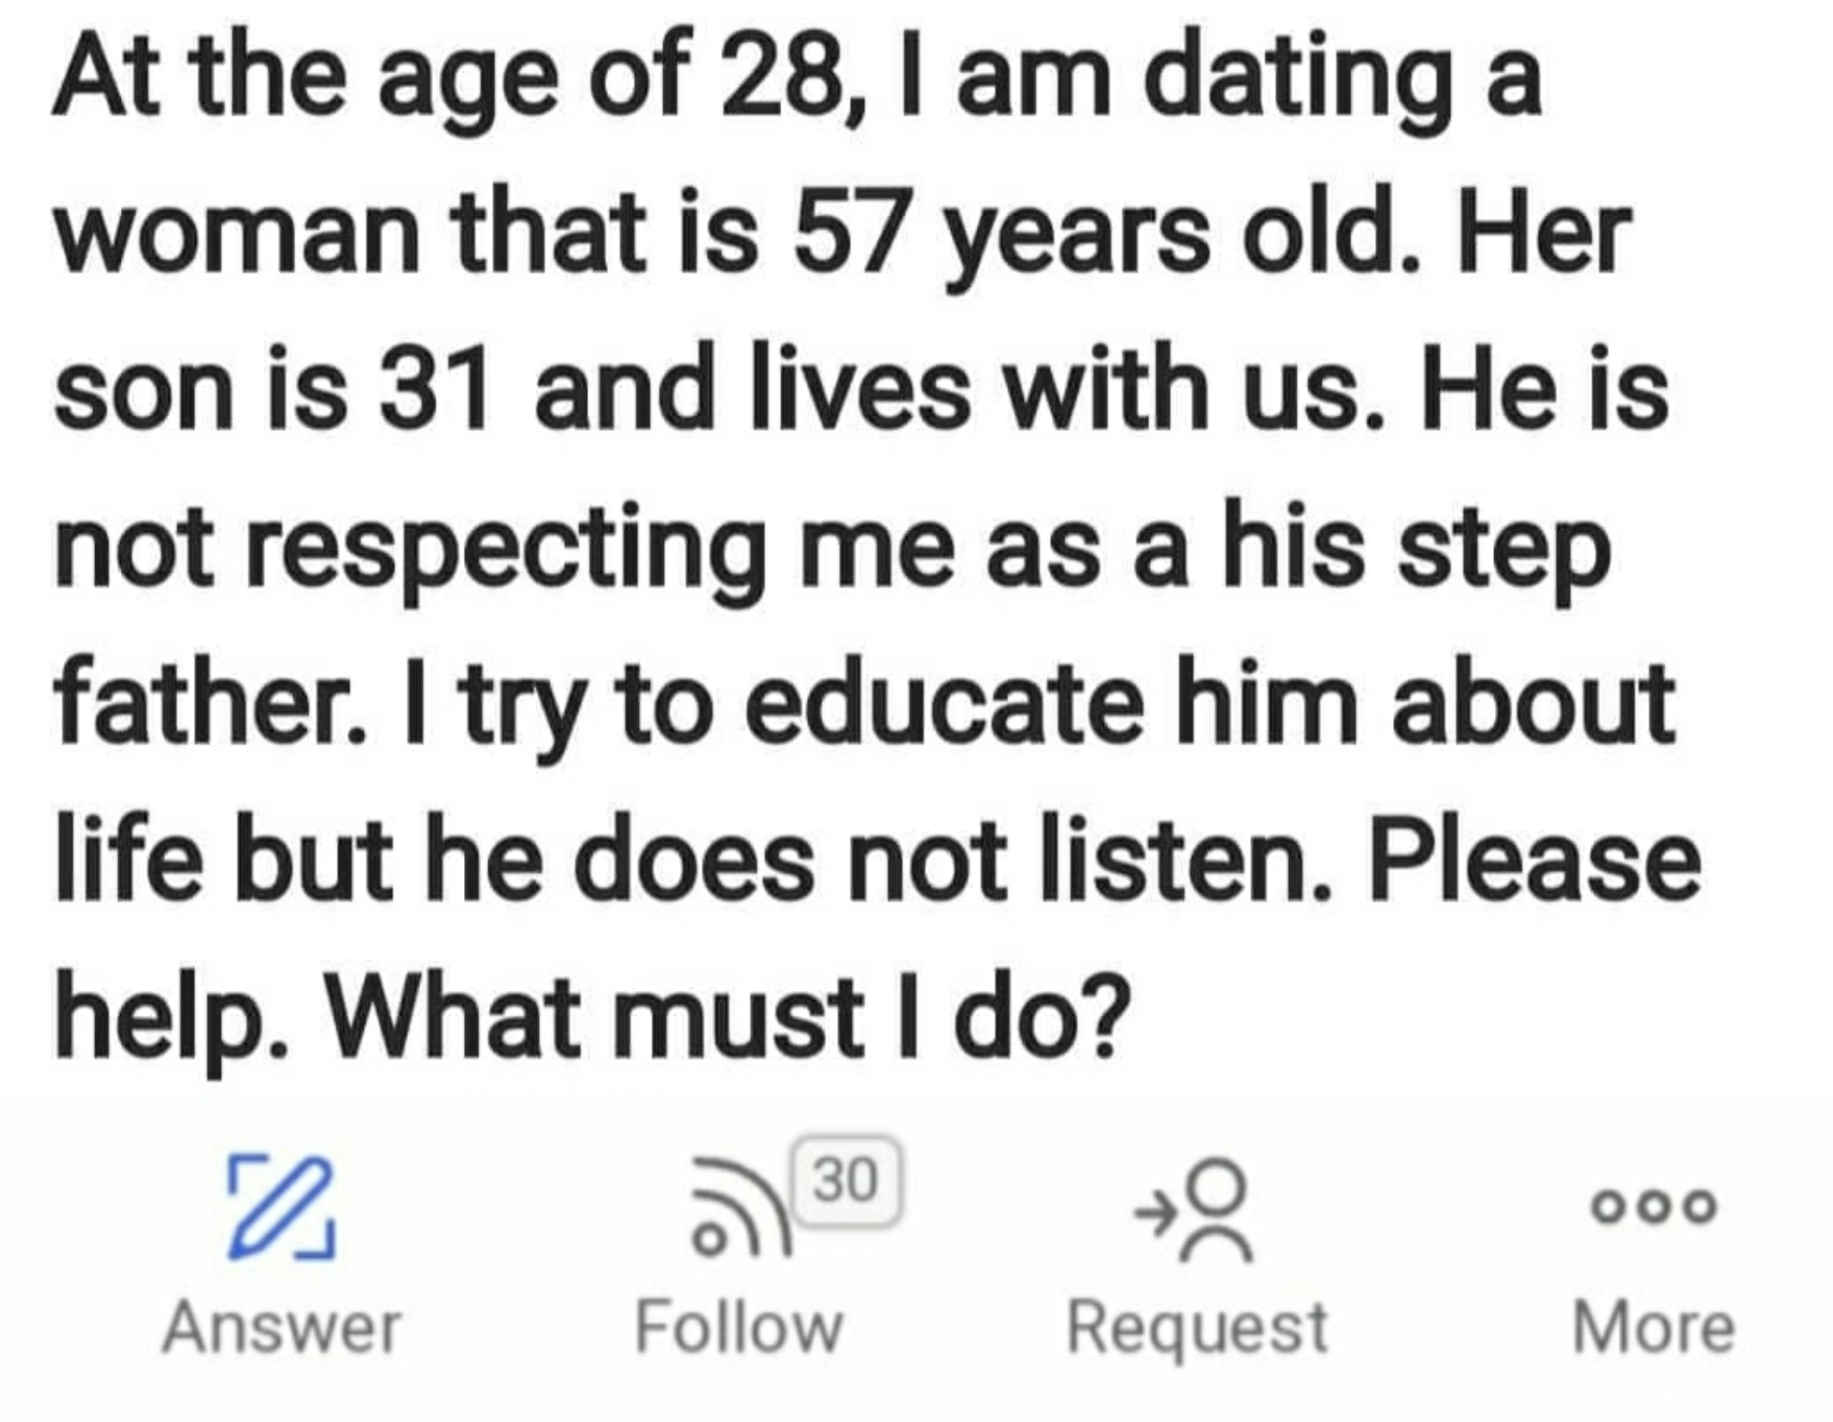 weird questions on quora - At the age of 28, I am dating a woman that is 57 years old. Her son is 31 and lives with us. He is not respecting me as a his step father. I try to educate him about life but he does not listen. Please help. What must I do? 0 30